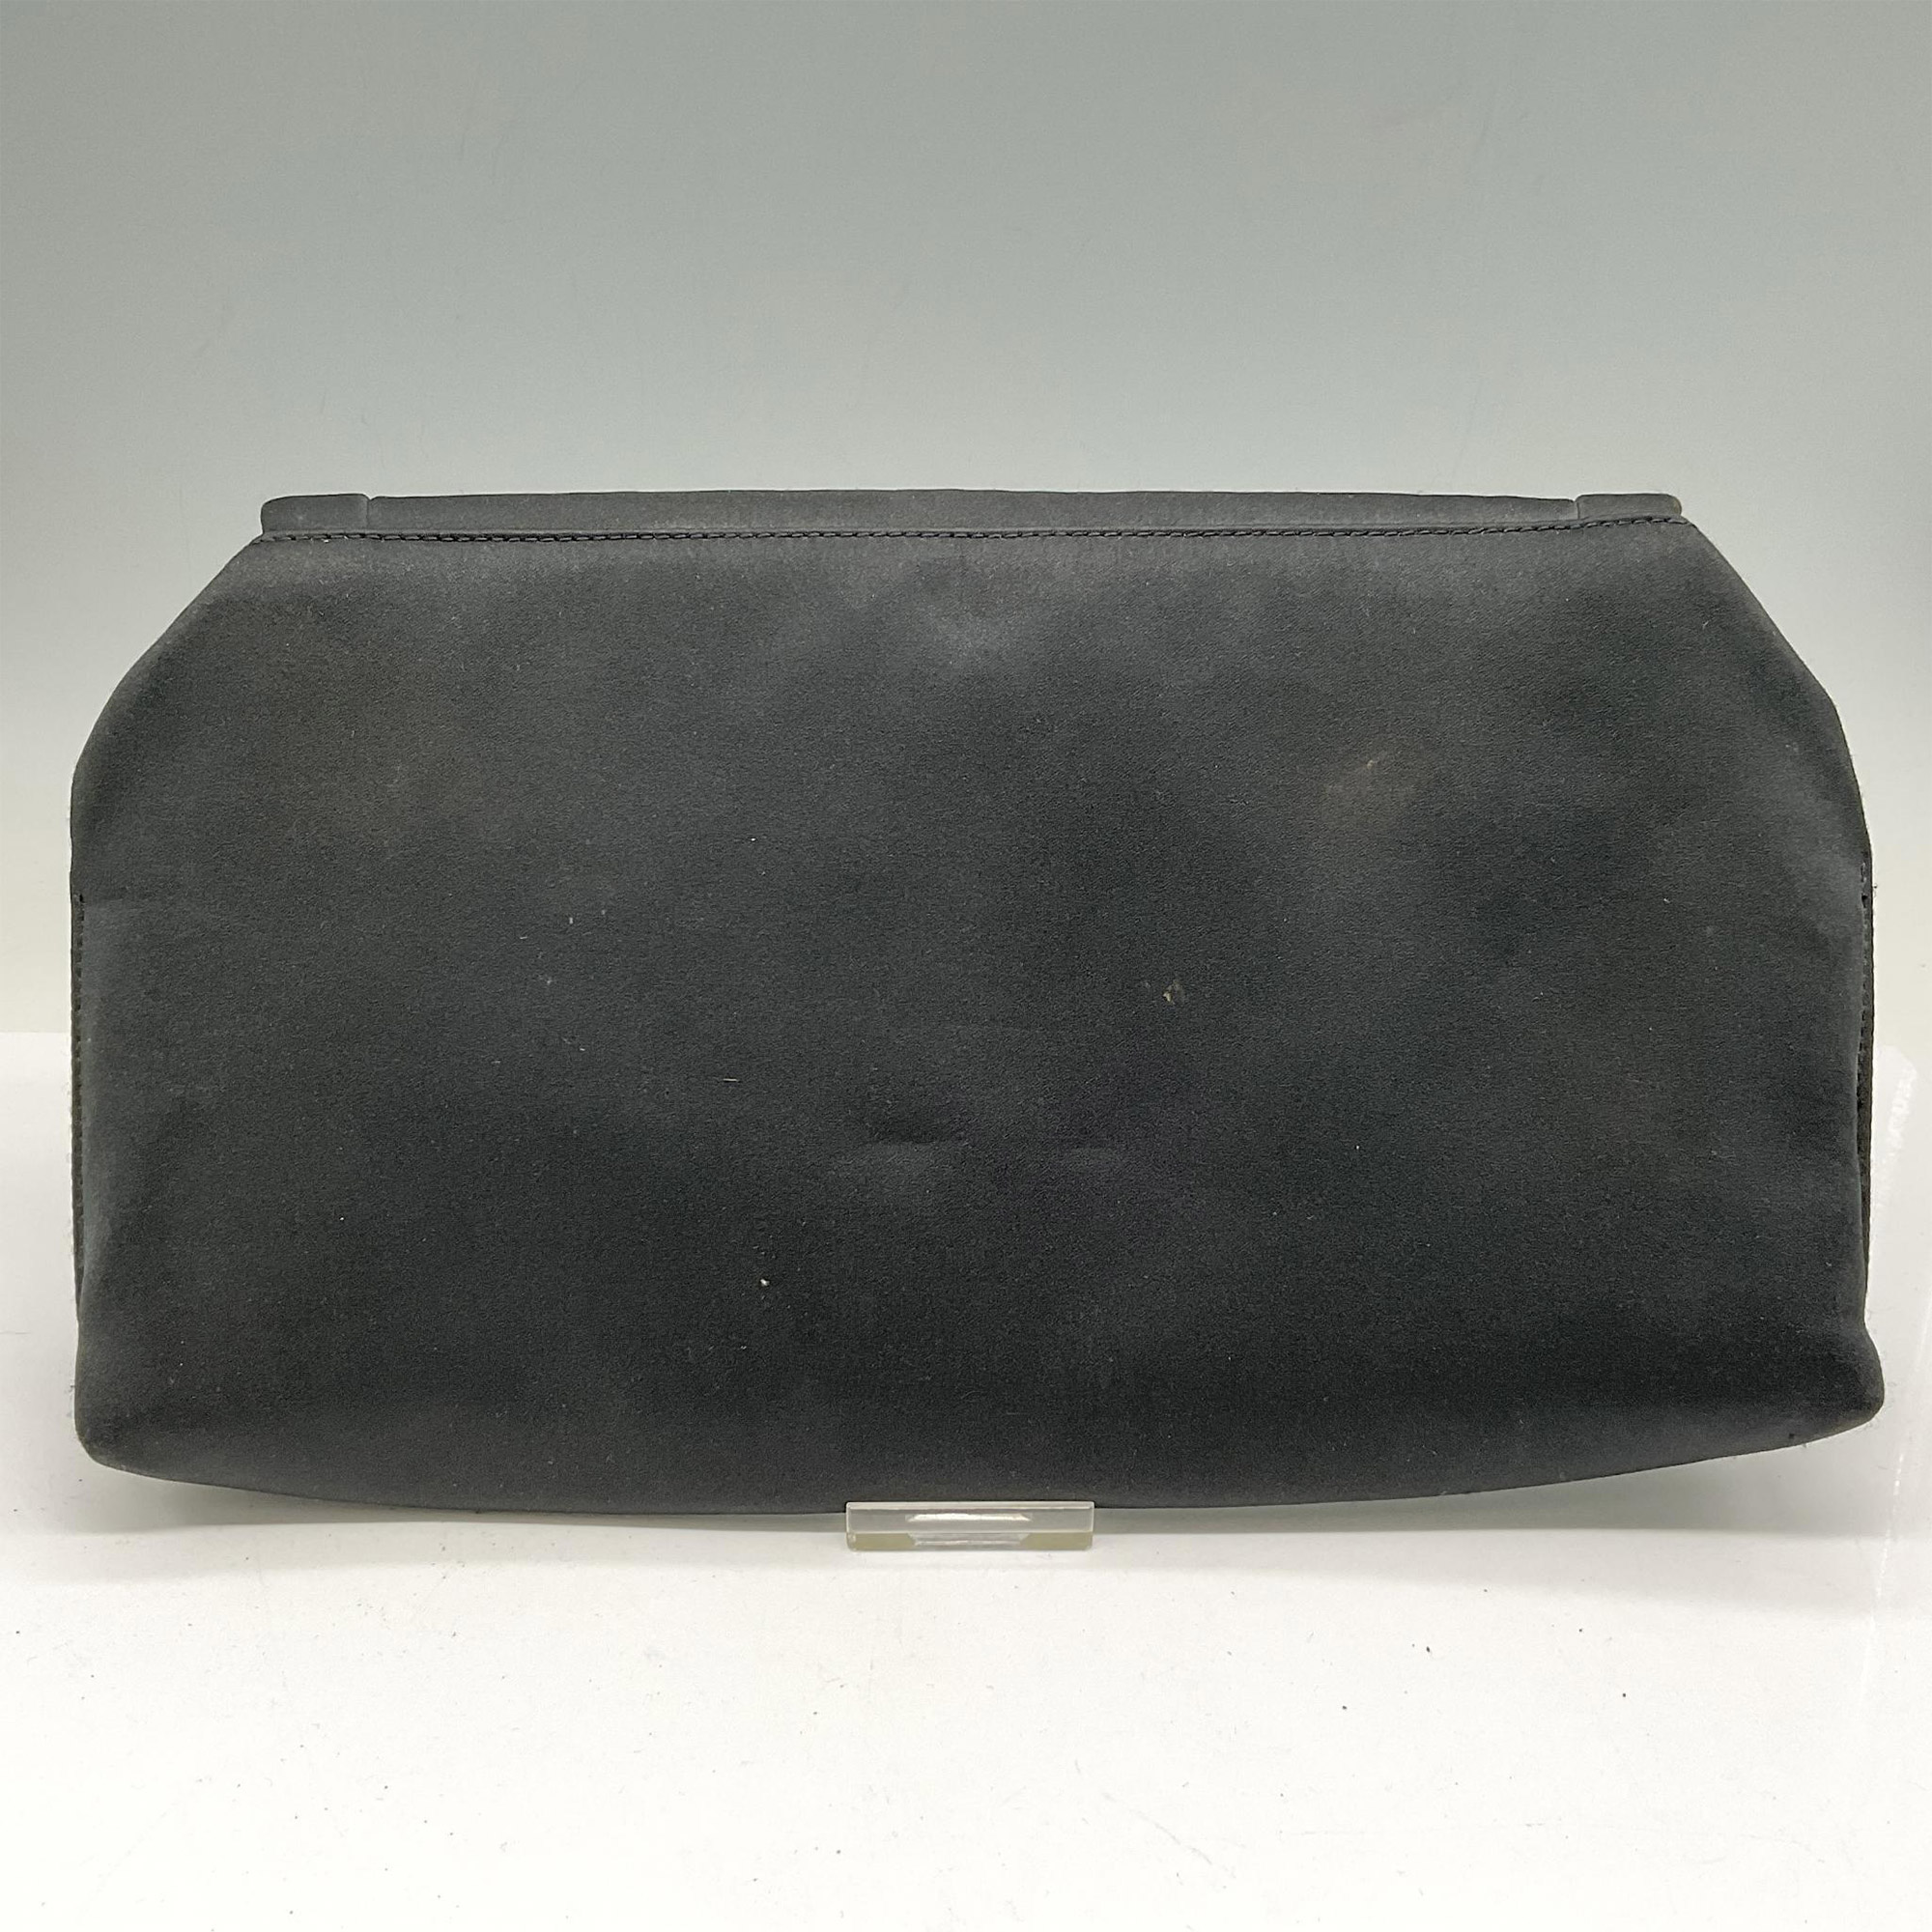 Rodo Black Satin Evening Clutch Bag with Brooch - Image 2 of 3